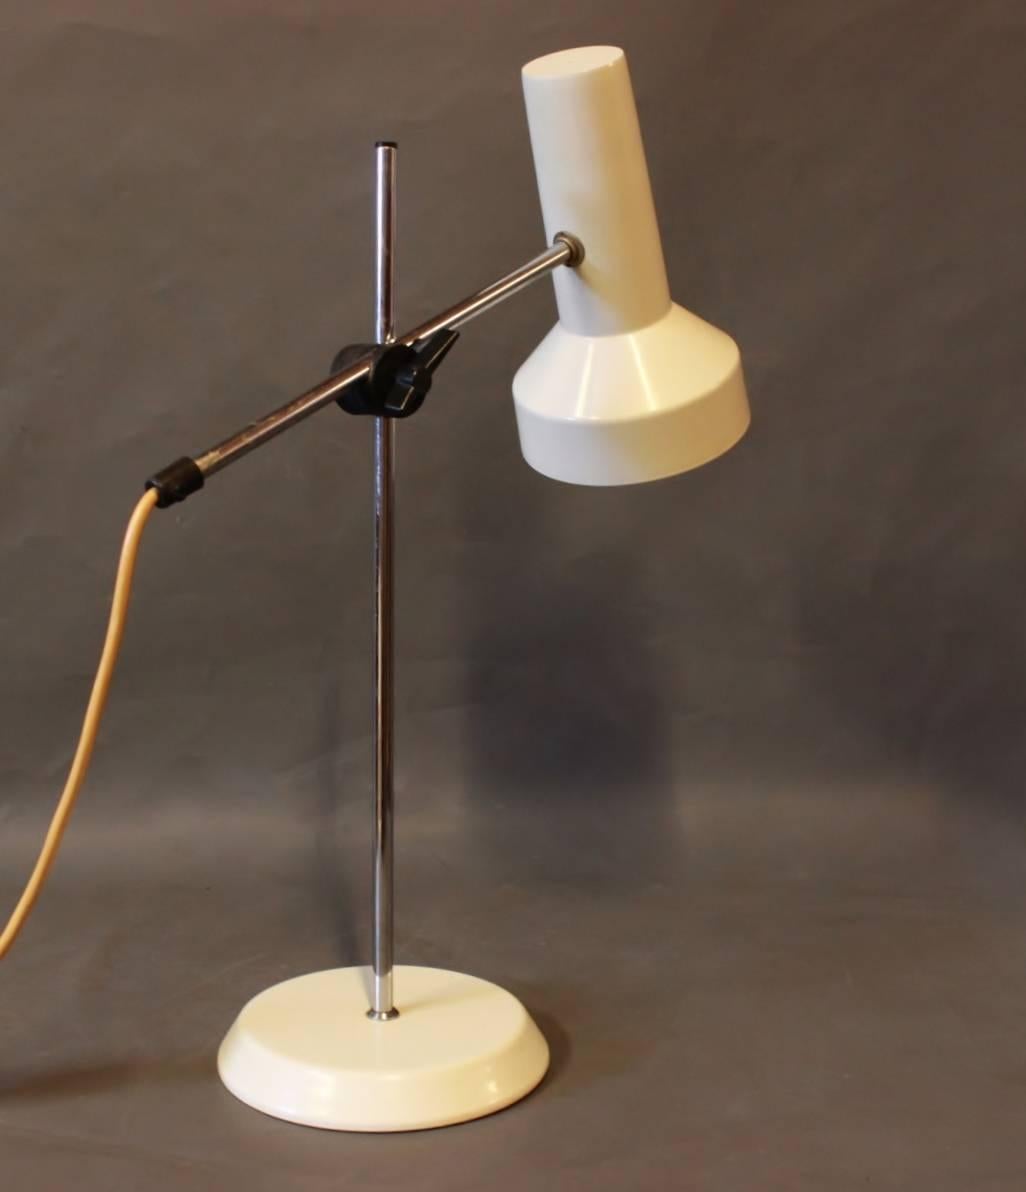 Scandinavian Modern Desk Lamp with White Lacquered Shade and Foot, 1960s For Sale